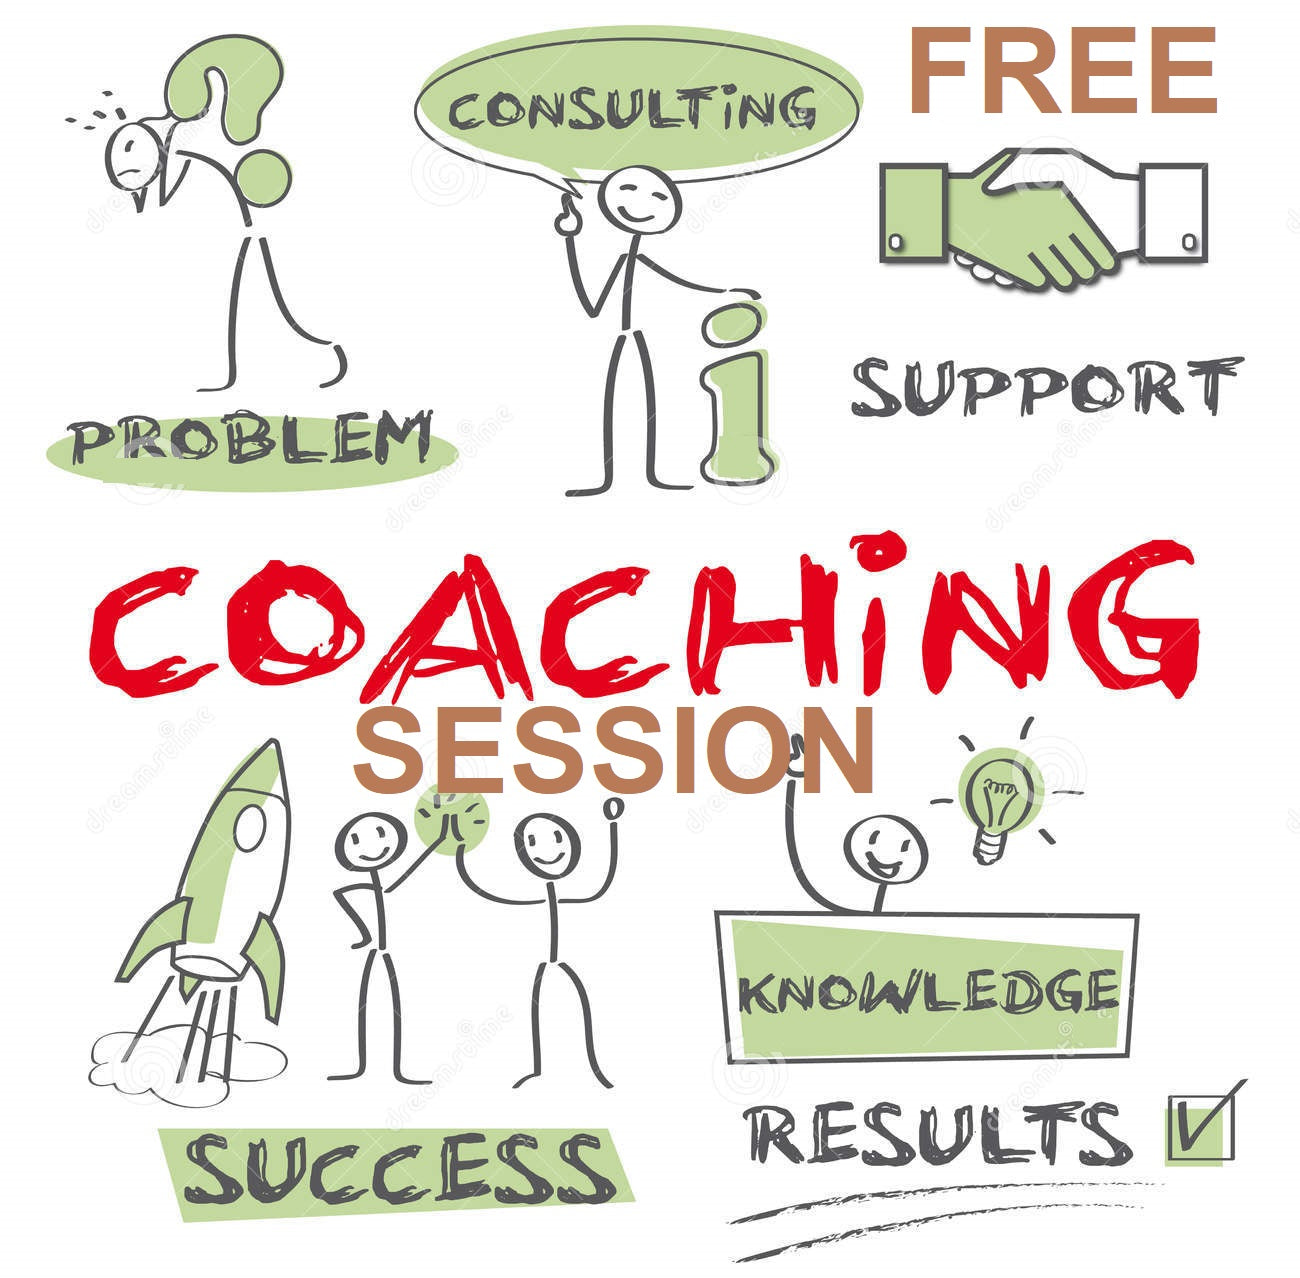 FREE Coaching - 15 Minutes - Introductory